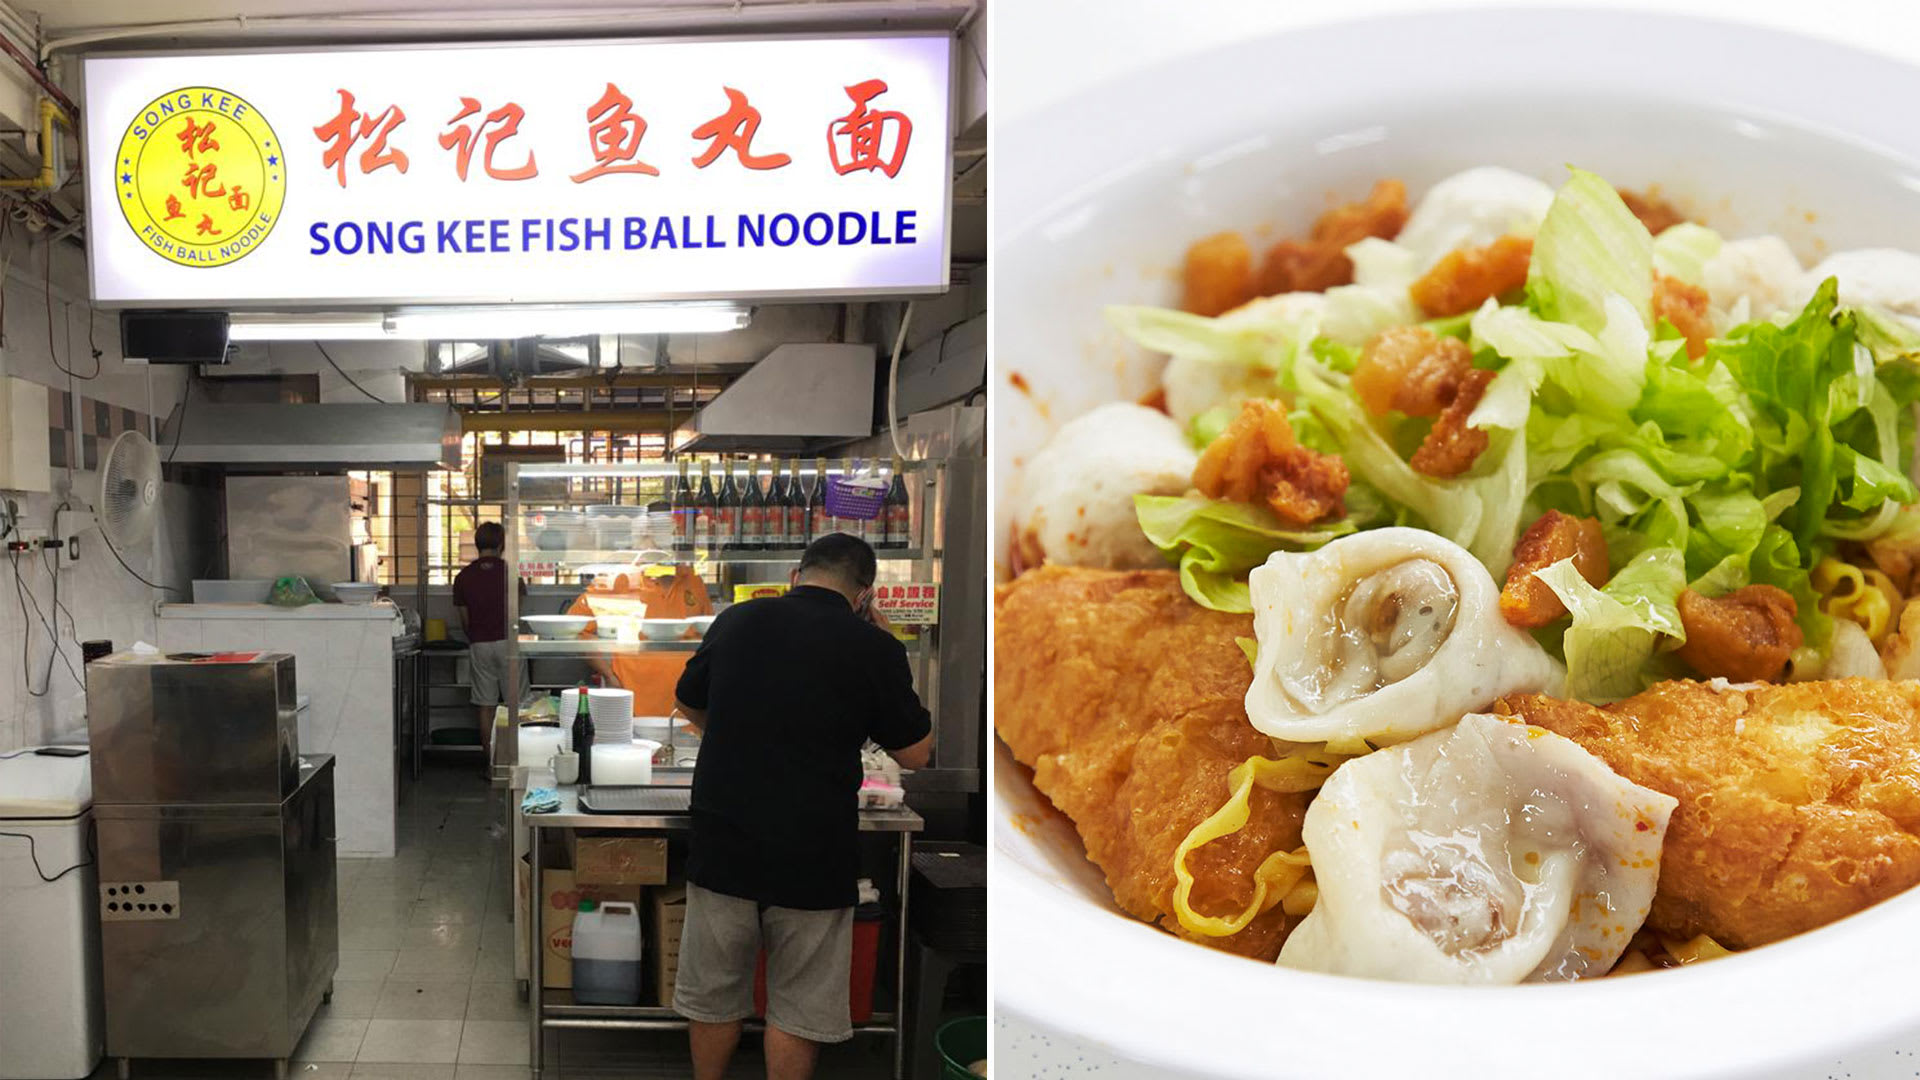 Song Kee Fishball Noodle Opens New Outlet At Toa Payoh, Will Sell Herh Keow